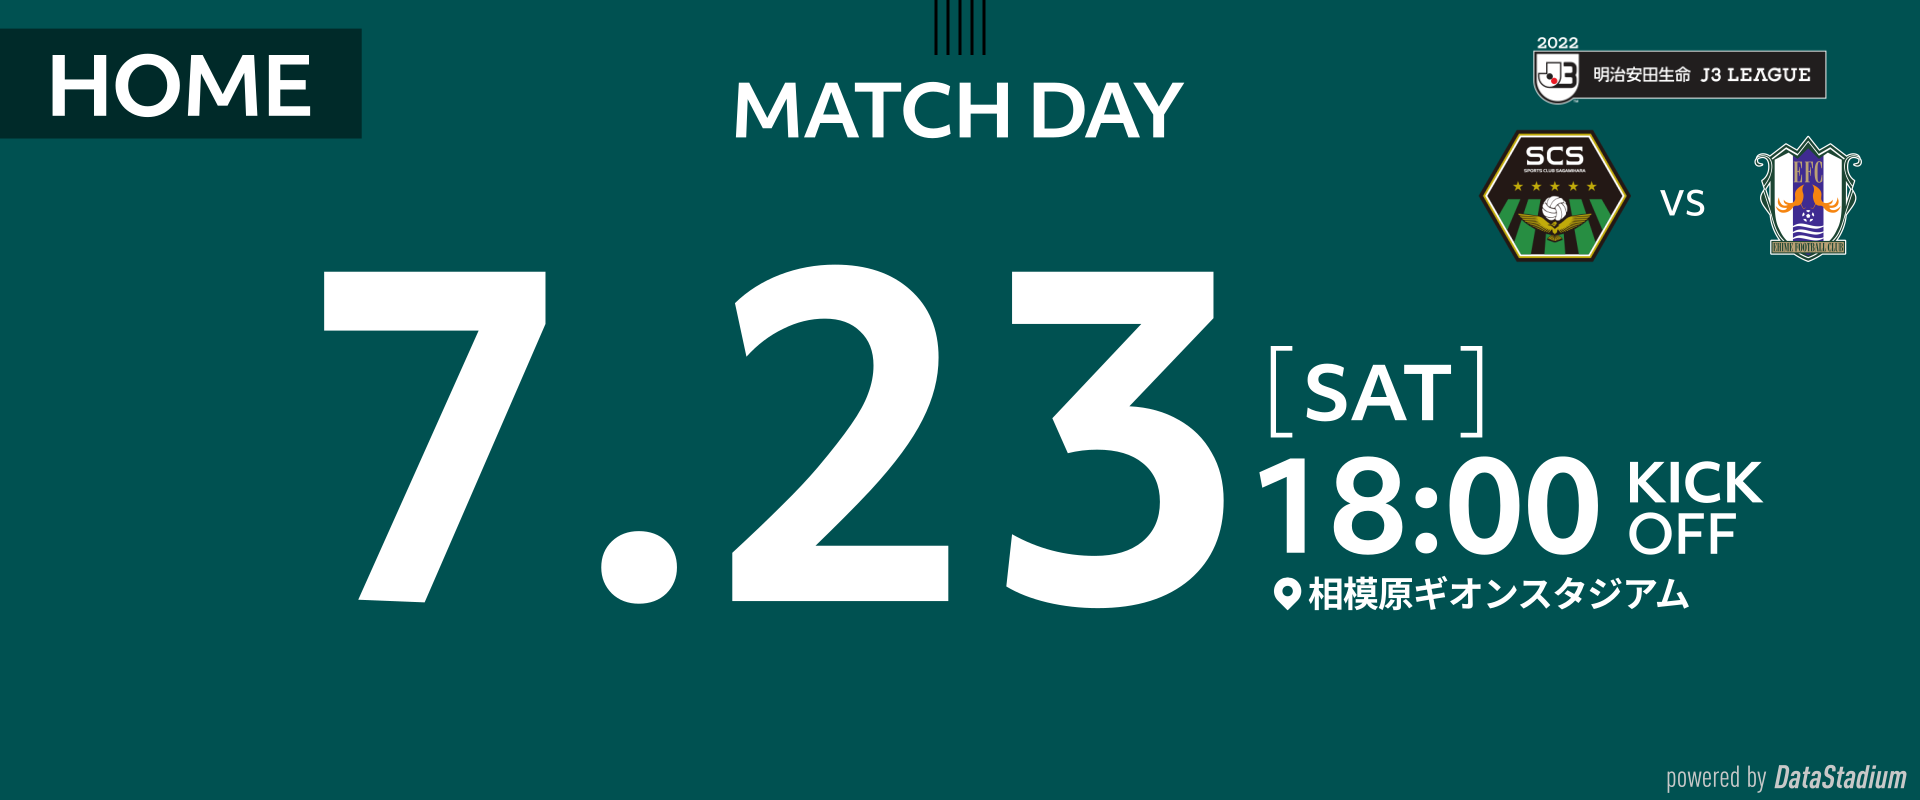 0723_matchday_1920_800.png